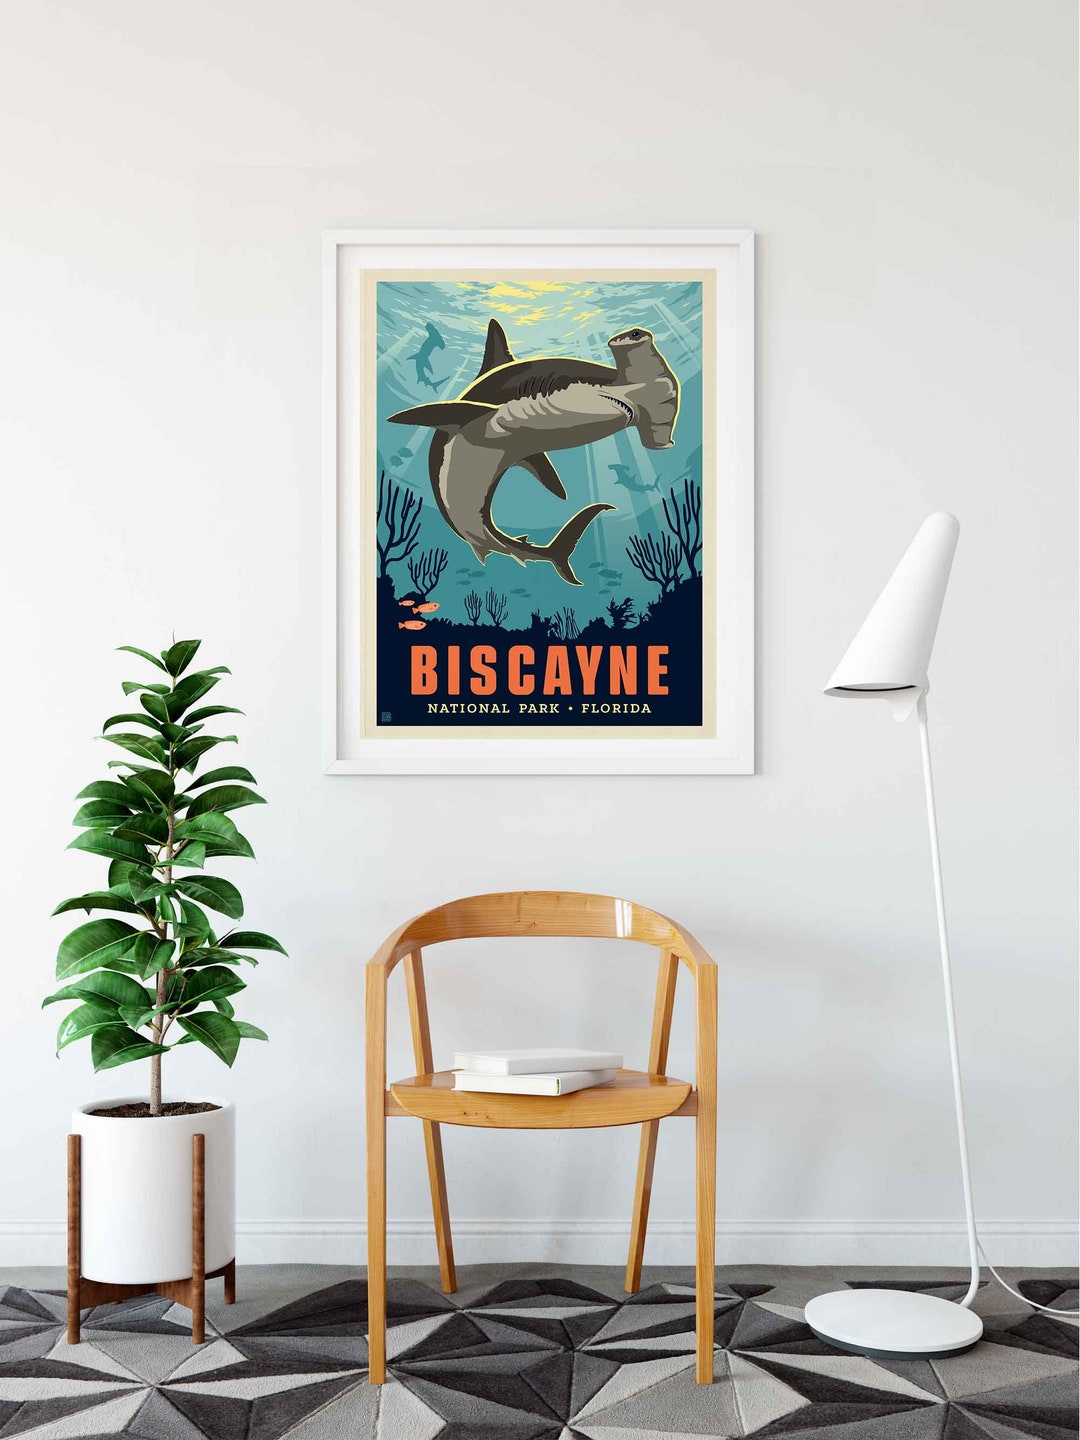 Biscayne National Park Travel Poster by Anderson Design Group - Etsy